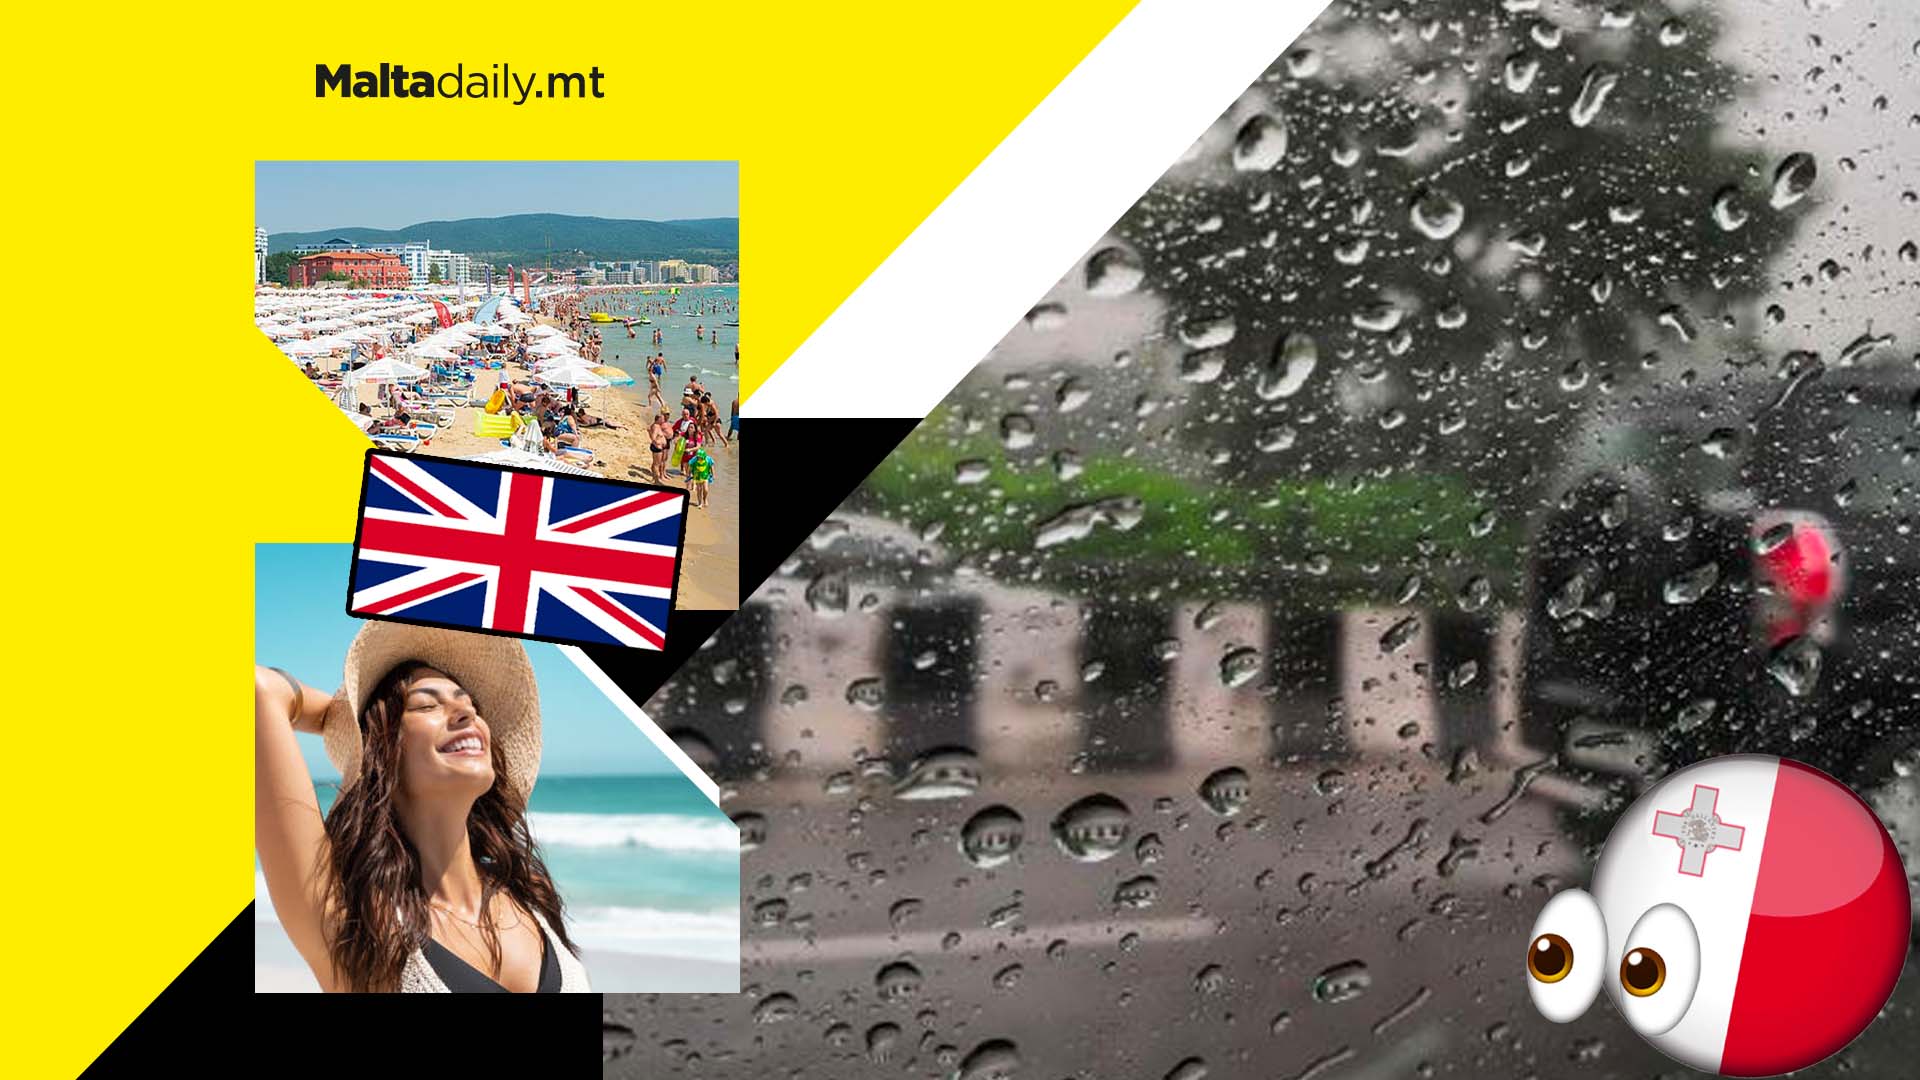 UK set for hottest day of the year as Malta enters a week of rainy weather